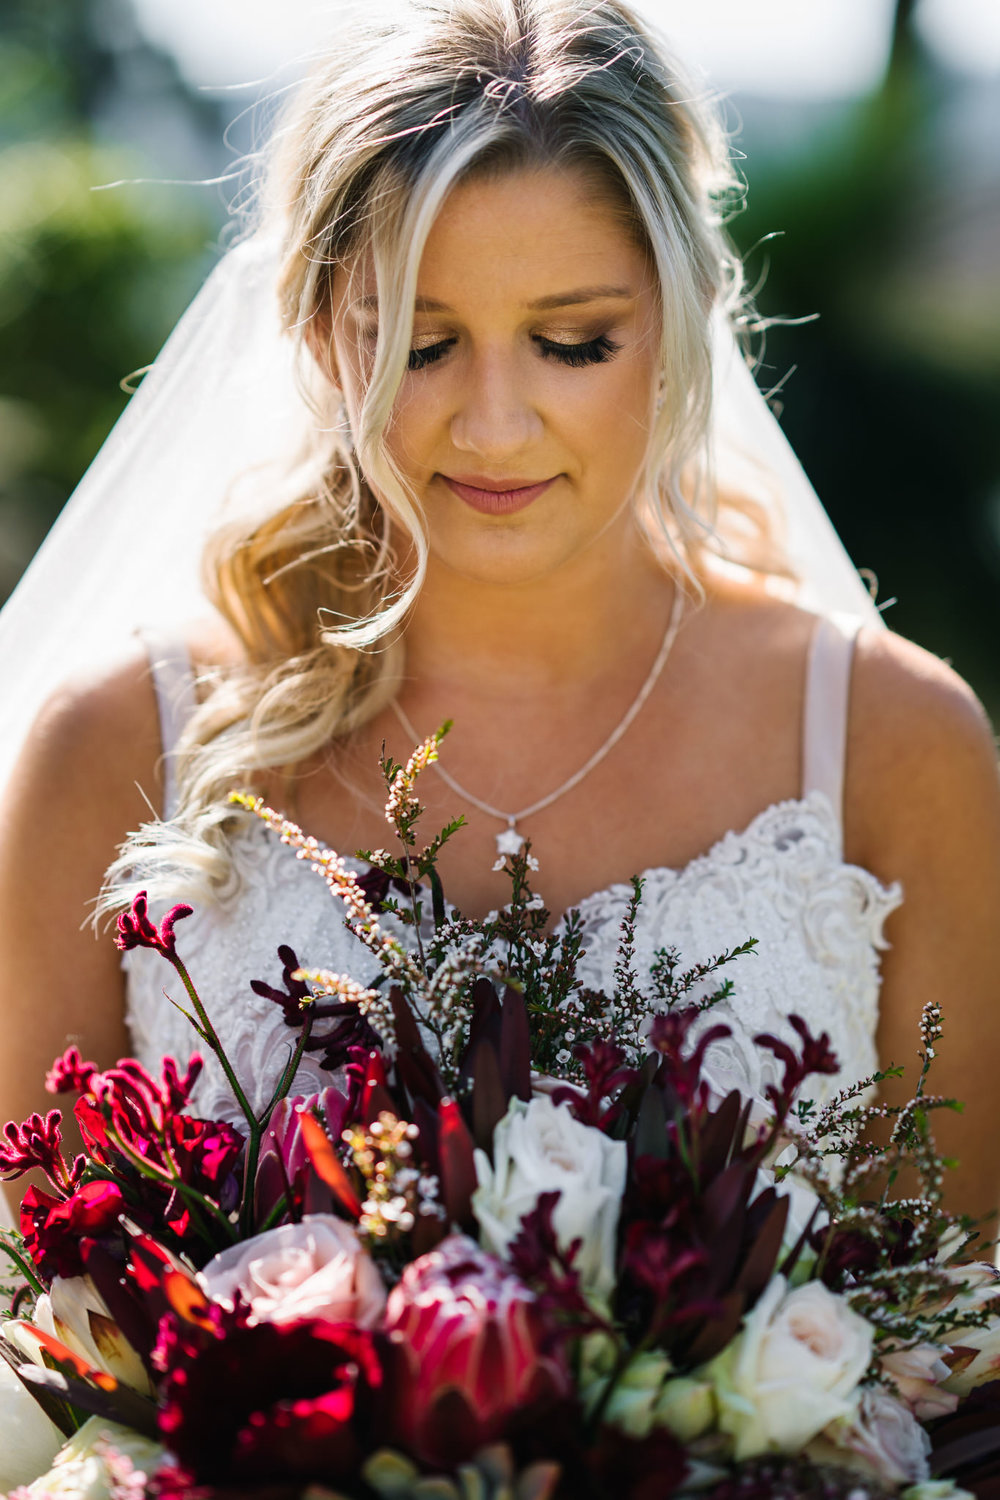 Bride holding bouquet with proteas, roses and kangaroo paw